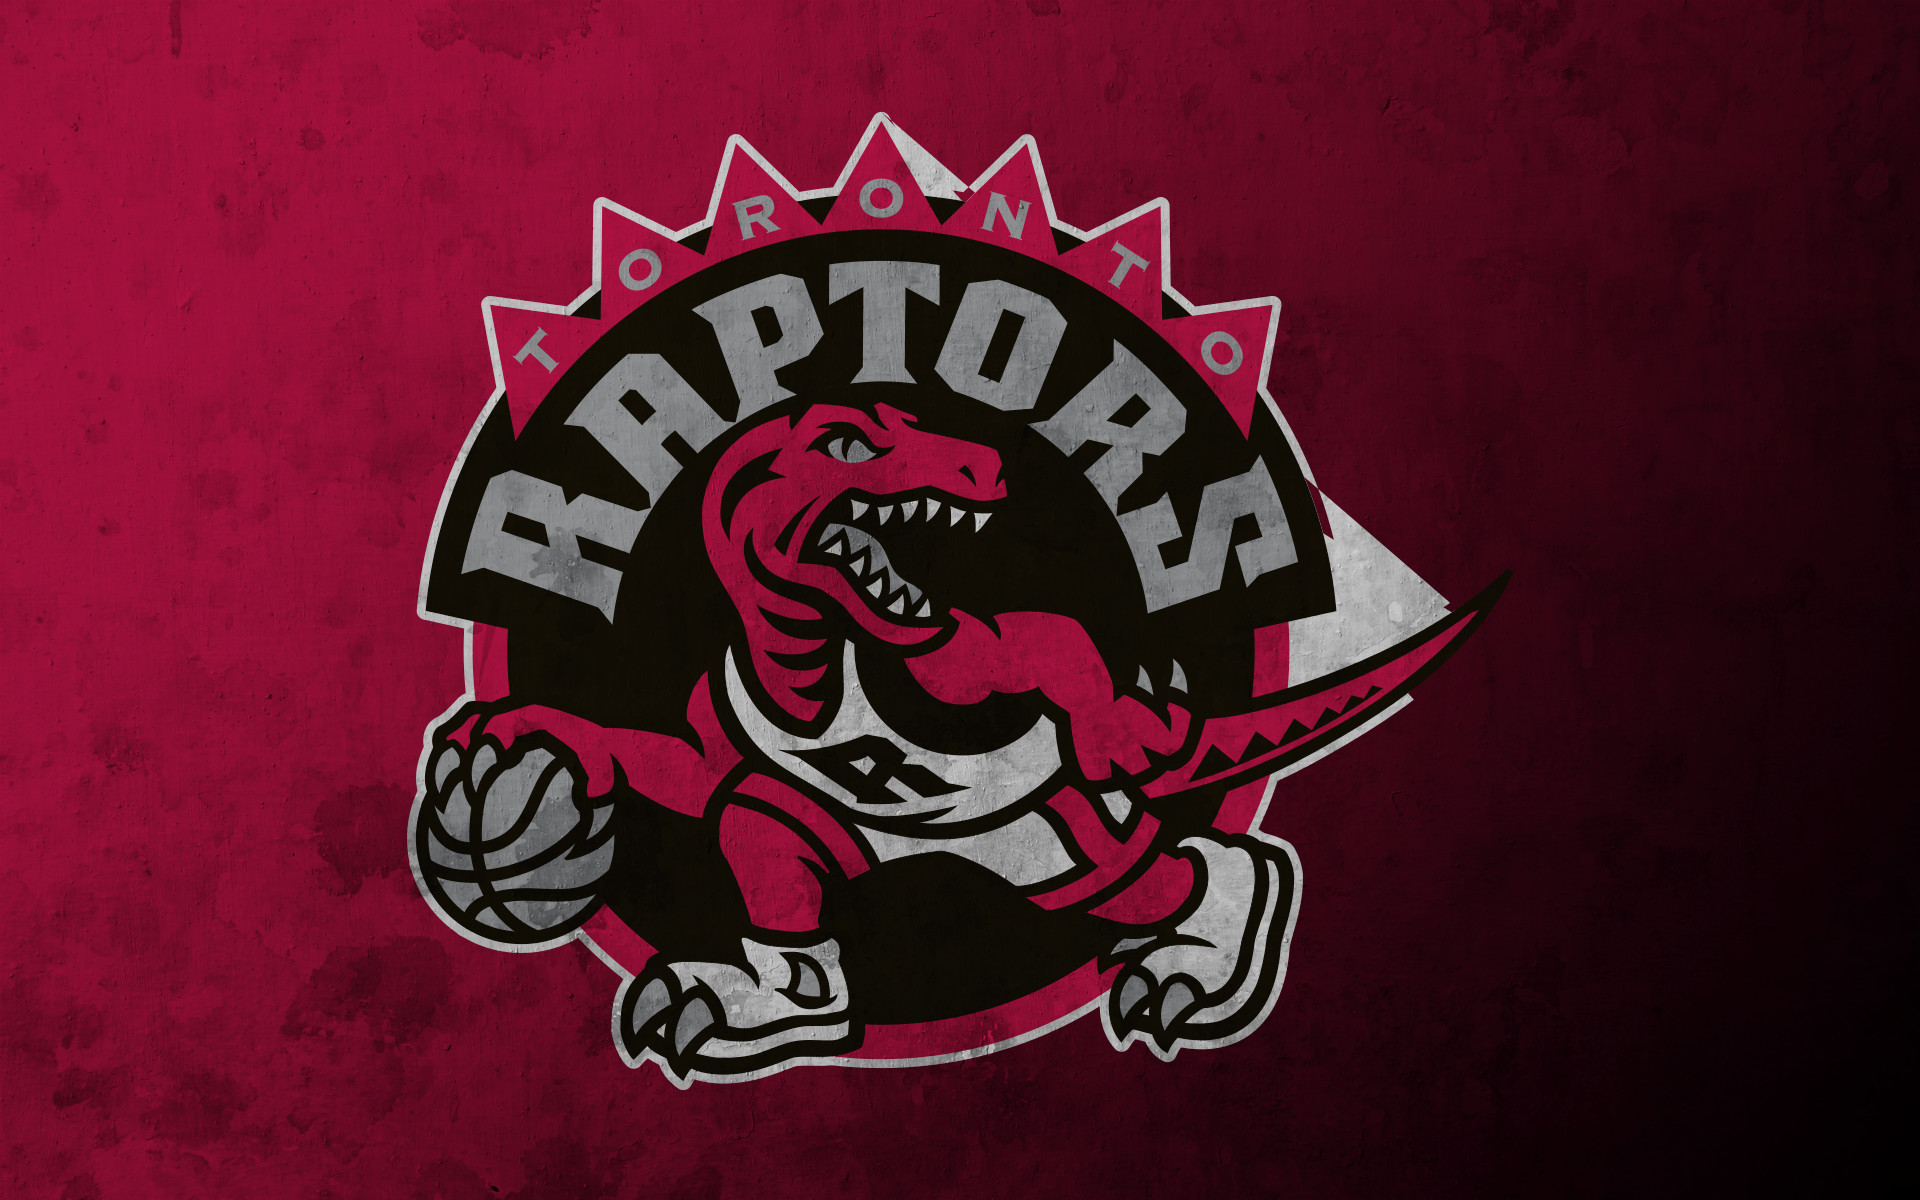 1920x1200 ... wallpaper and here's a Raptors one that I, uh, never got around to  fixing the whitespace issues on. Give me a day if anyone's interested on  that one.